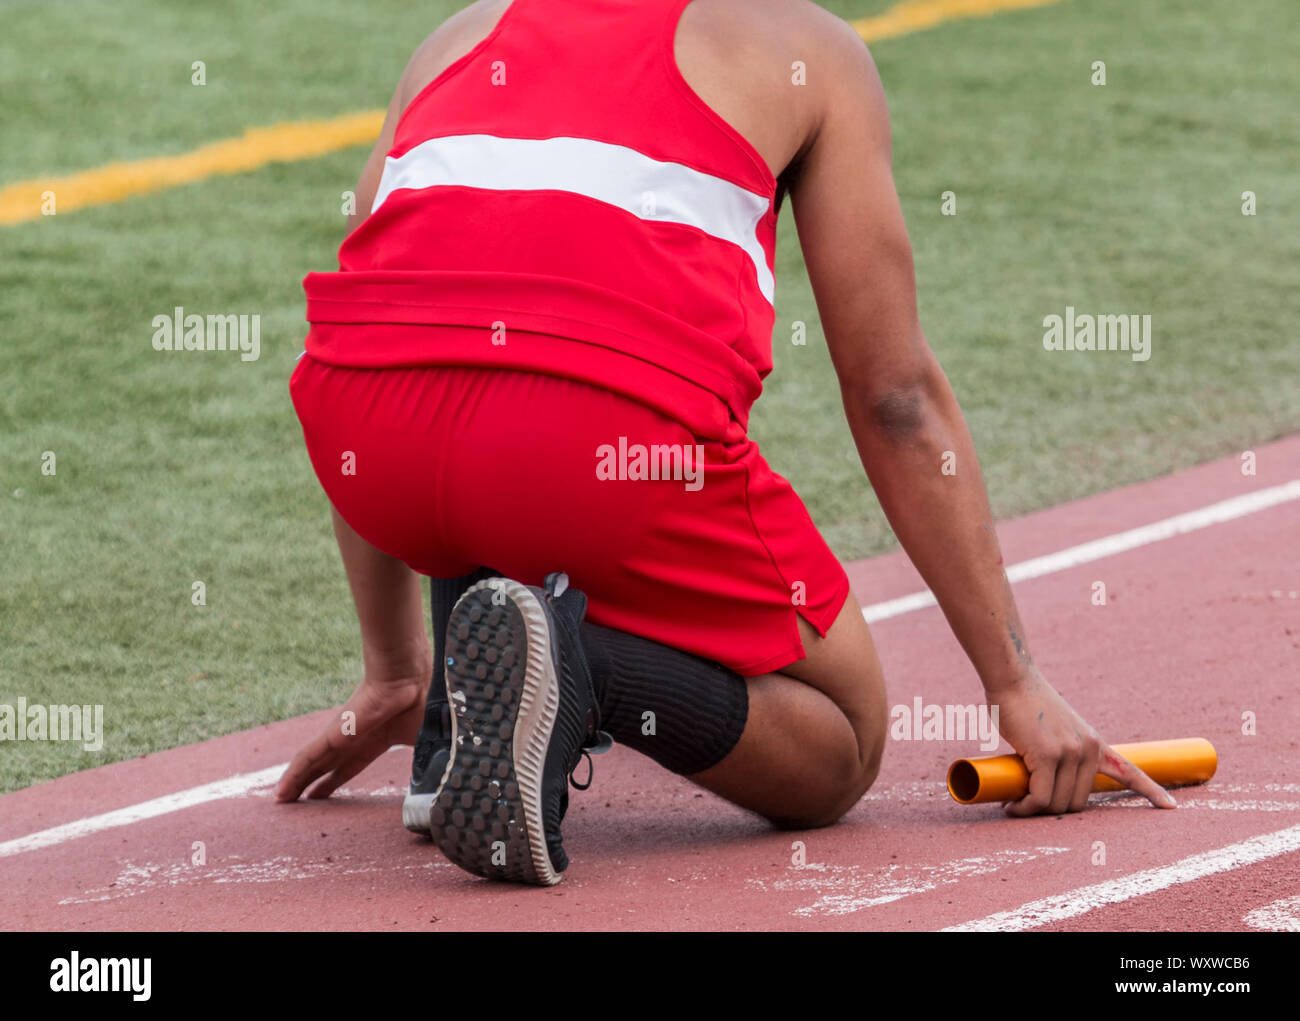 A high school runner is in the on your mark position ready to start a relay race at a track and field competition. Stock Photo